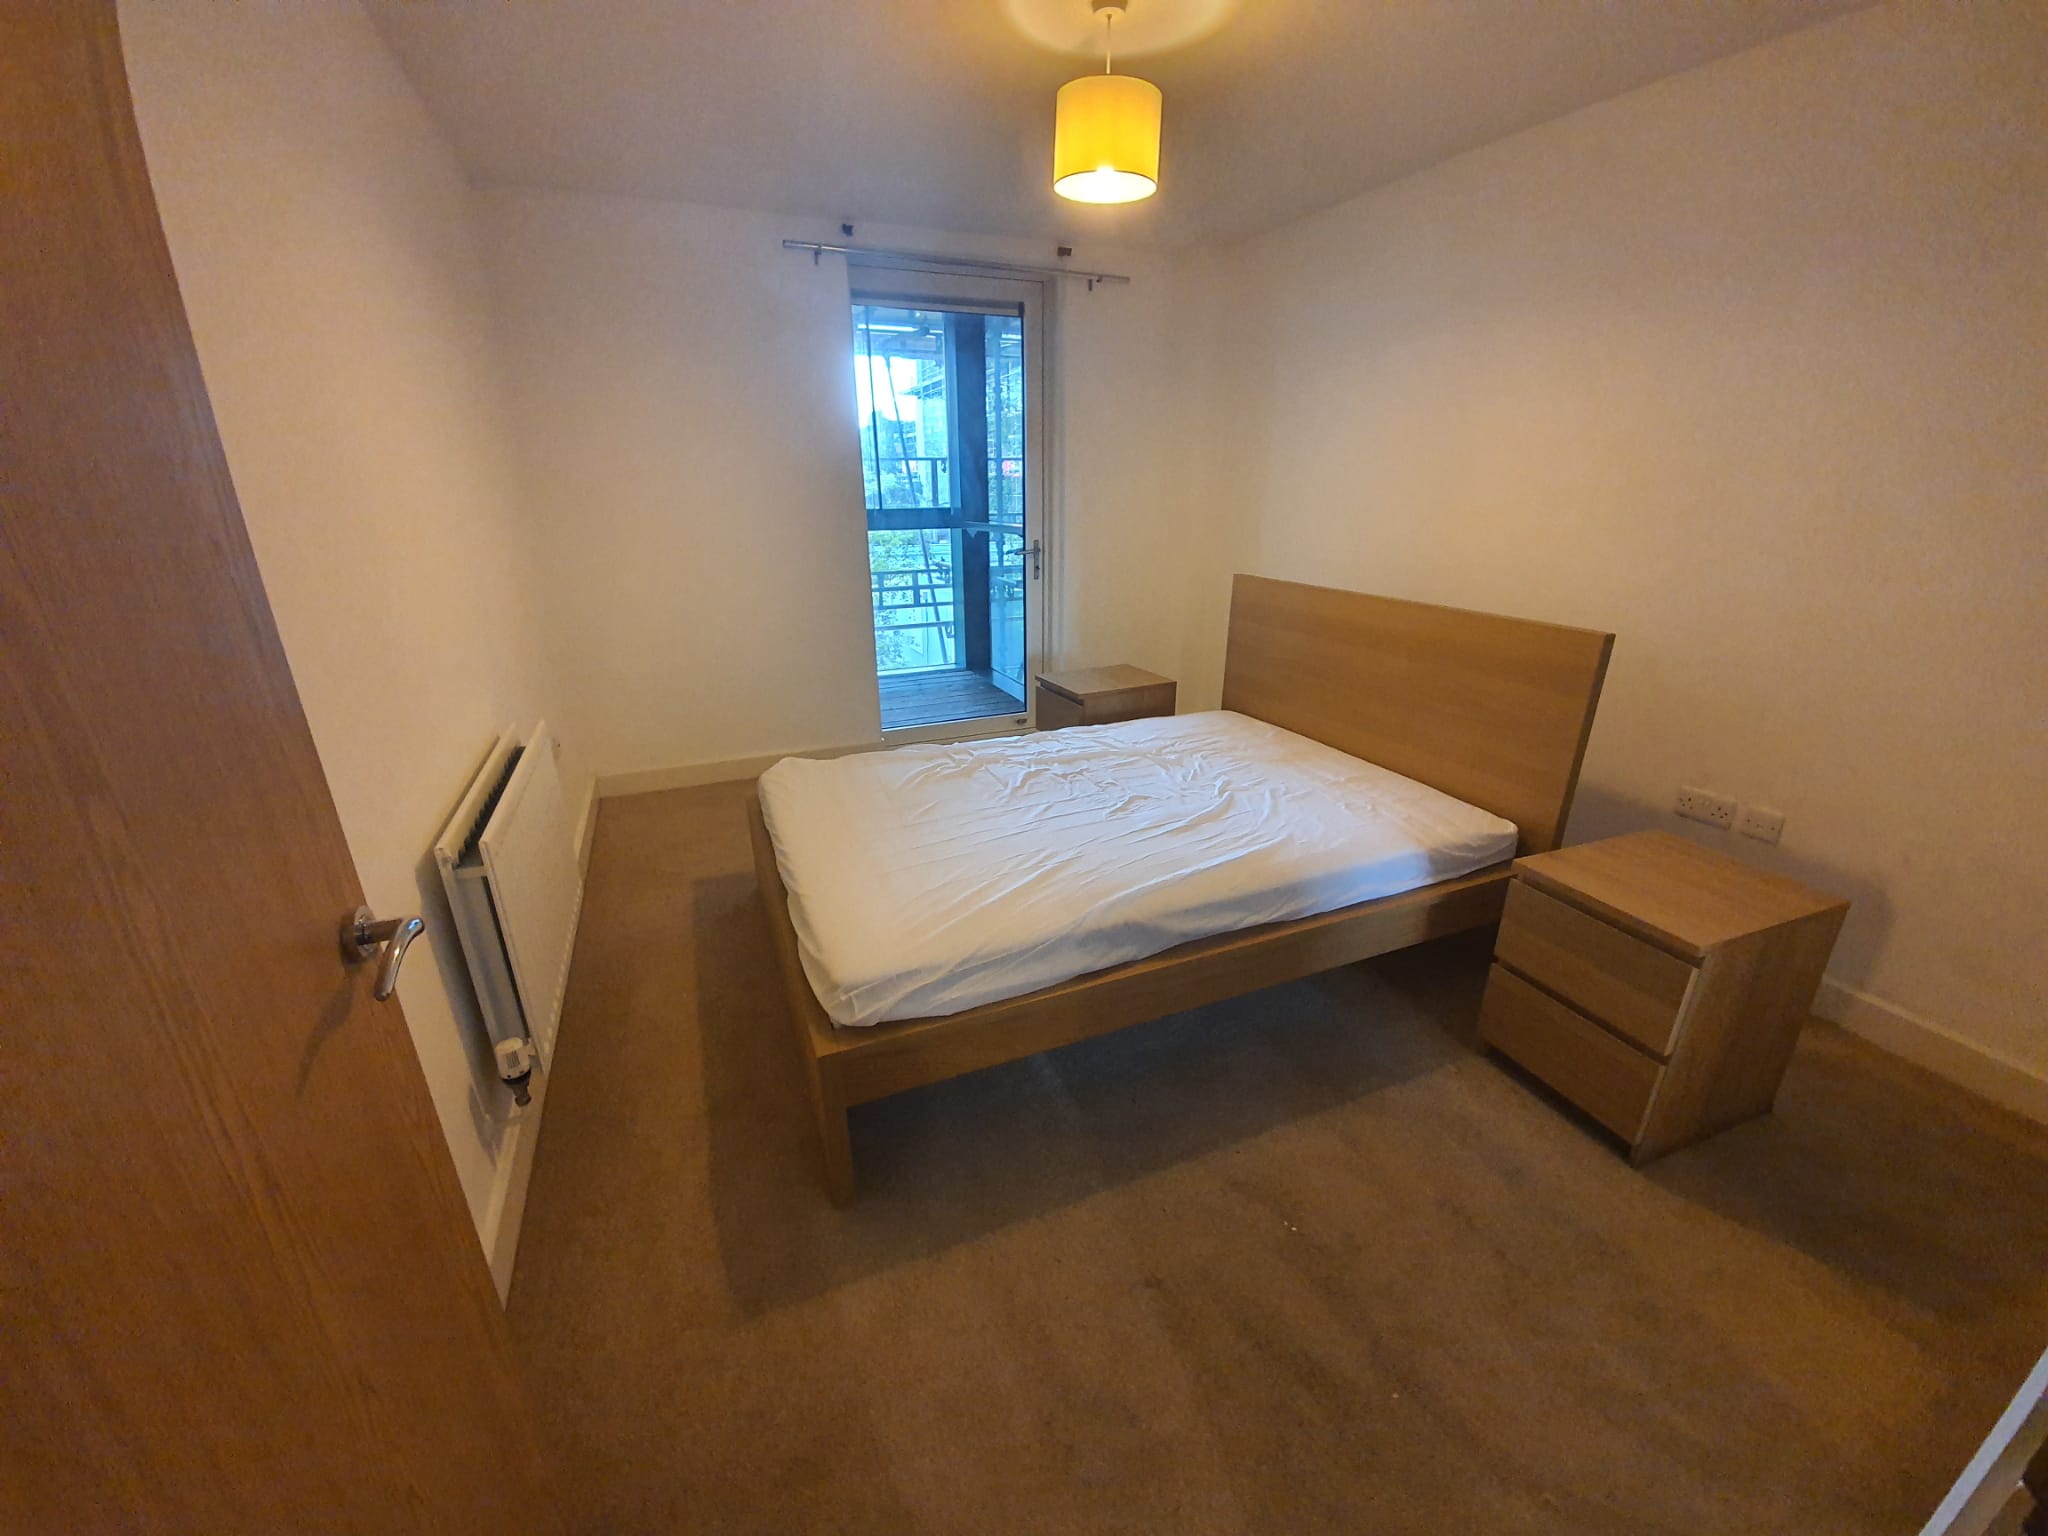 1 bedroom flat to rent in dalston